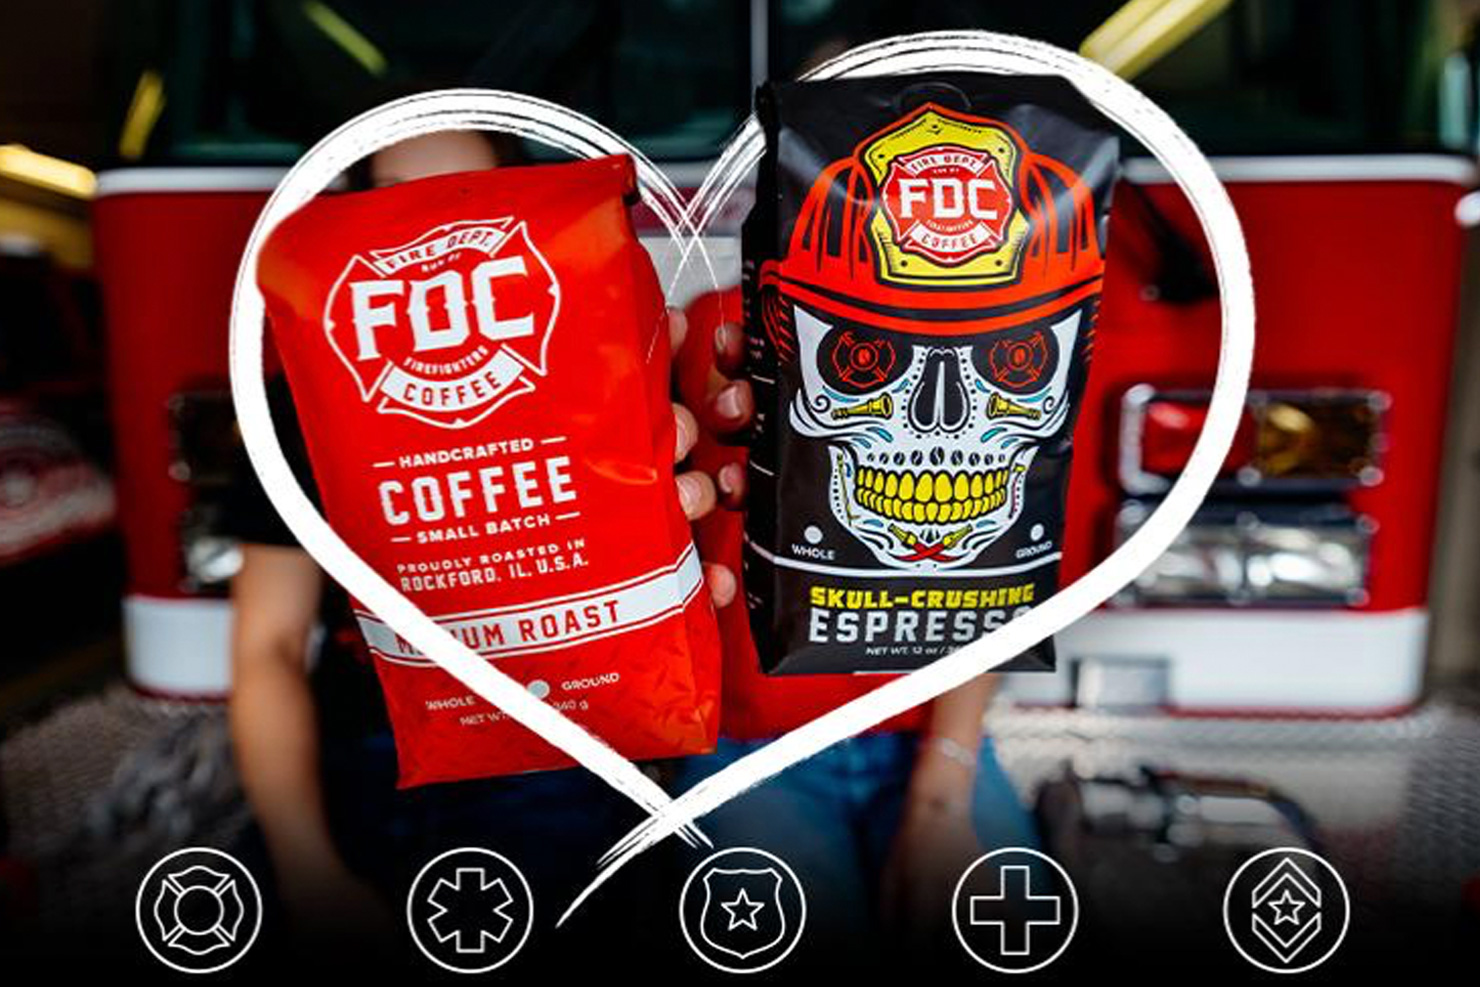 Two Fire Department Coffee bags being held out toward the camera. One bag is Medium Roast Coffee and the other is Shellback Espresso Coffee. The coffee bags are wrapped with a superimposed image of a heart and below are icons for Firefighter, Paramedics/EMS, Police, Nurses and Military members. The background is the setting of a fire station and showing the front end of a red firetruck.